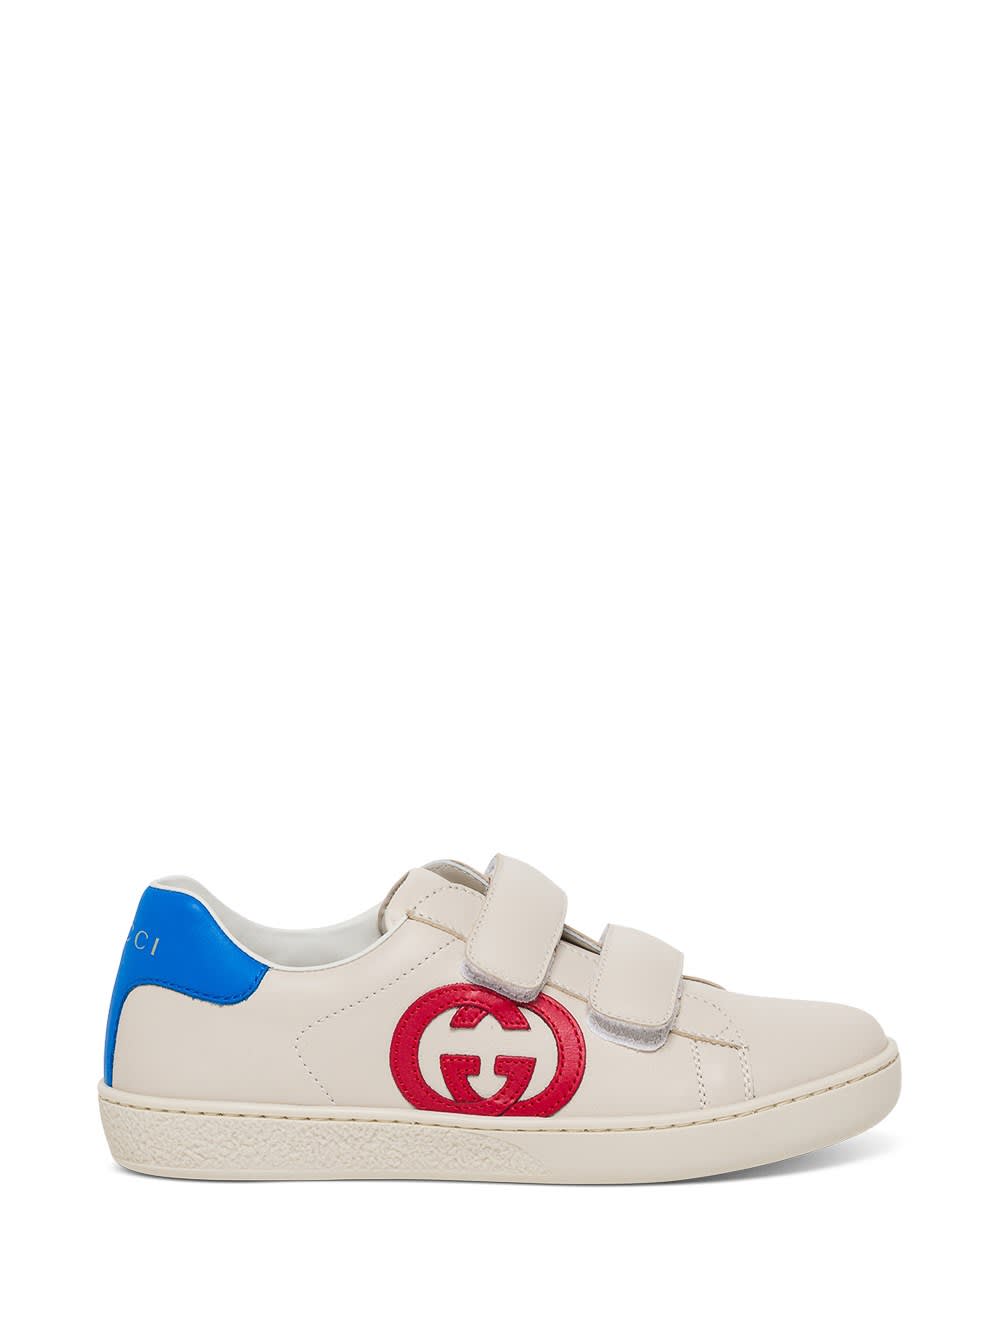 Gucci Ace Leather Sneakers With Logo